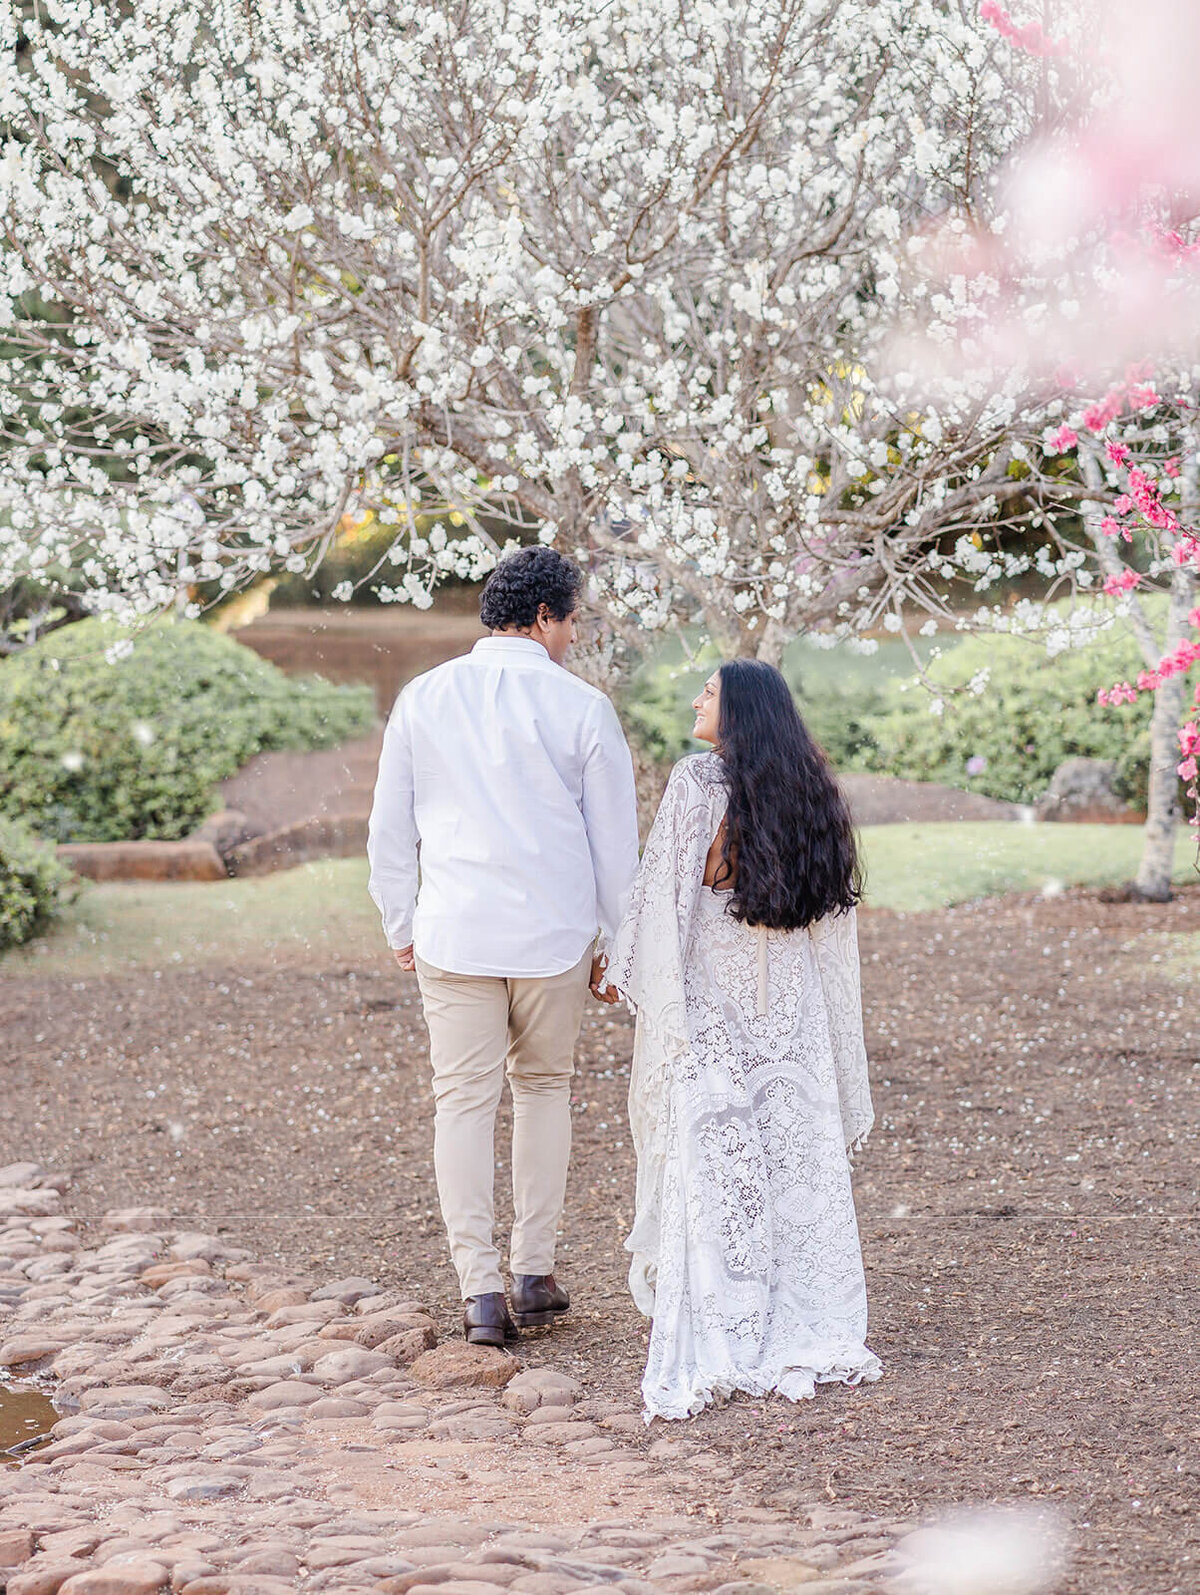 Experience the serenity of pregnancy captured at Gold Coast Japanese garden in maternity photos